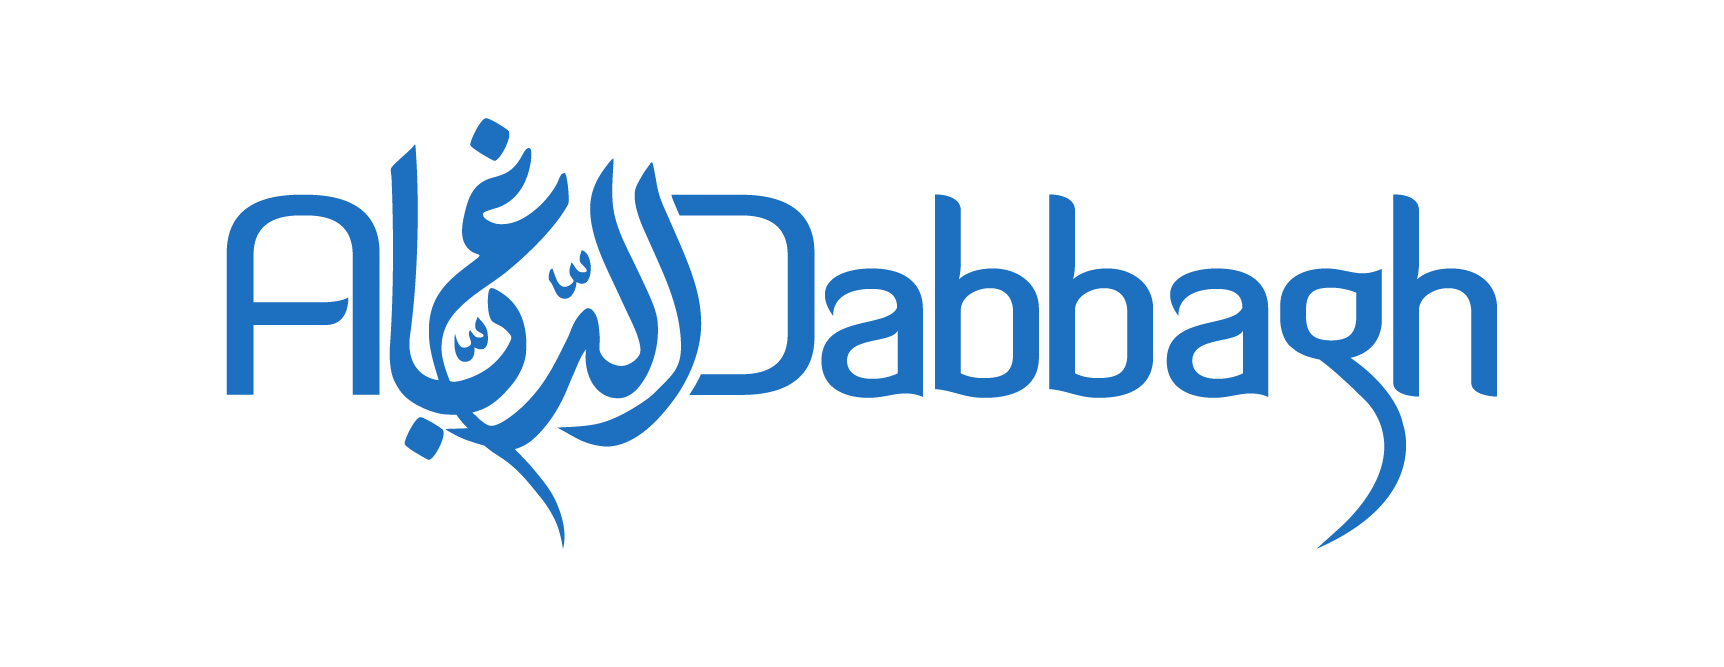 Al-Dabbagh Group Names American Tech Executive to Oversee its Philanthropic Activities Worldwide Image.